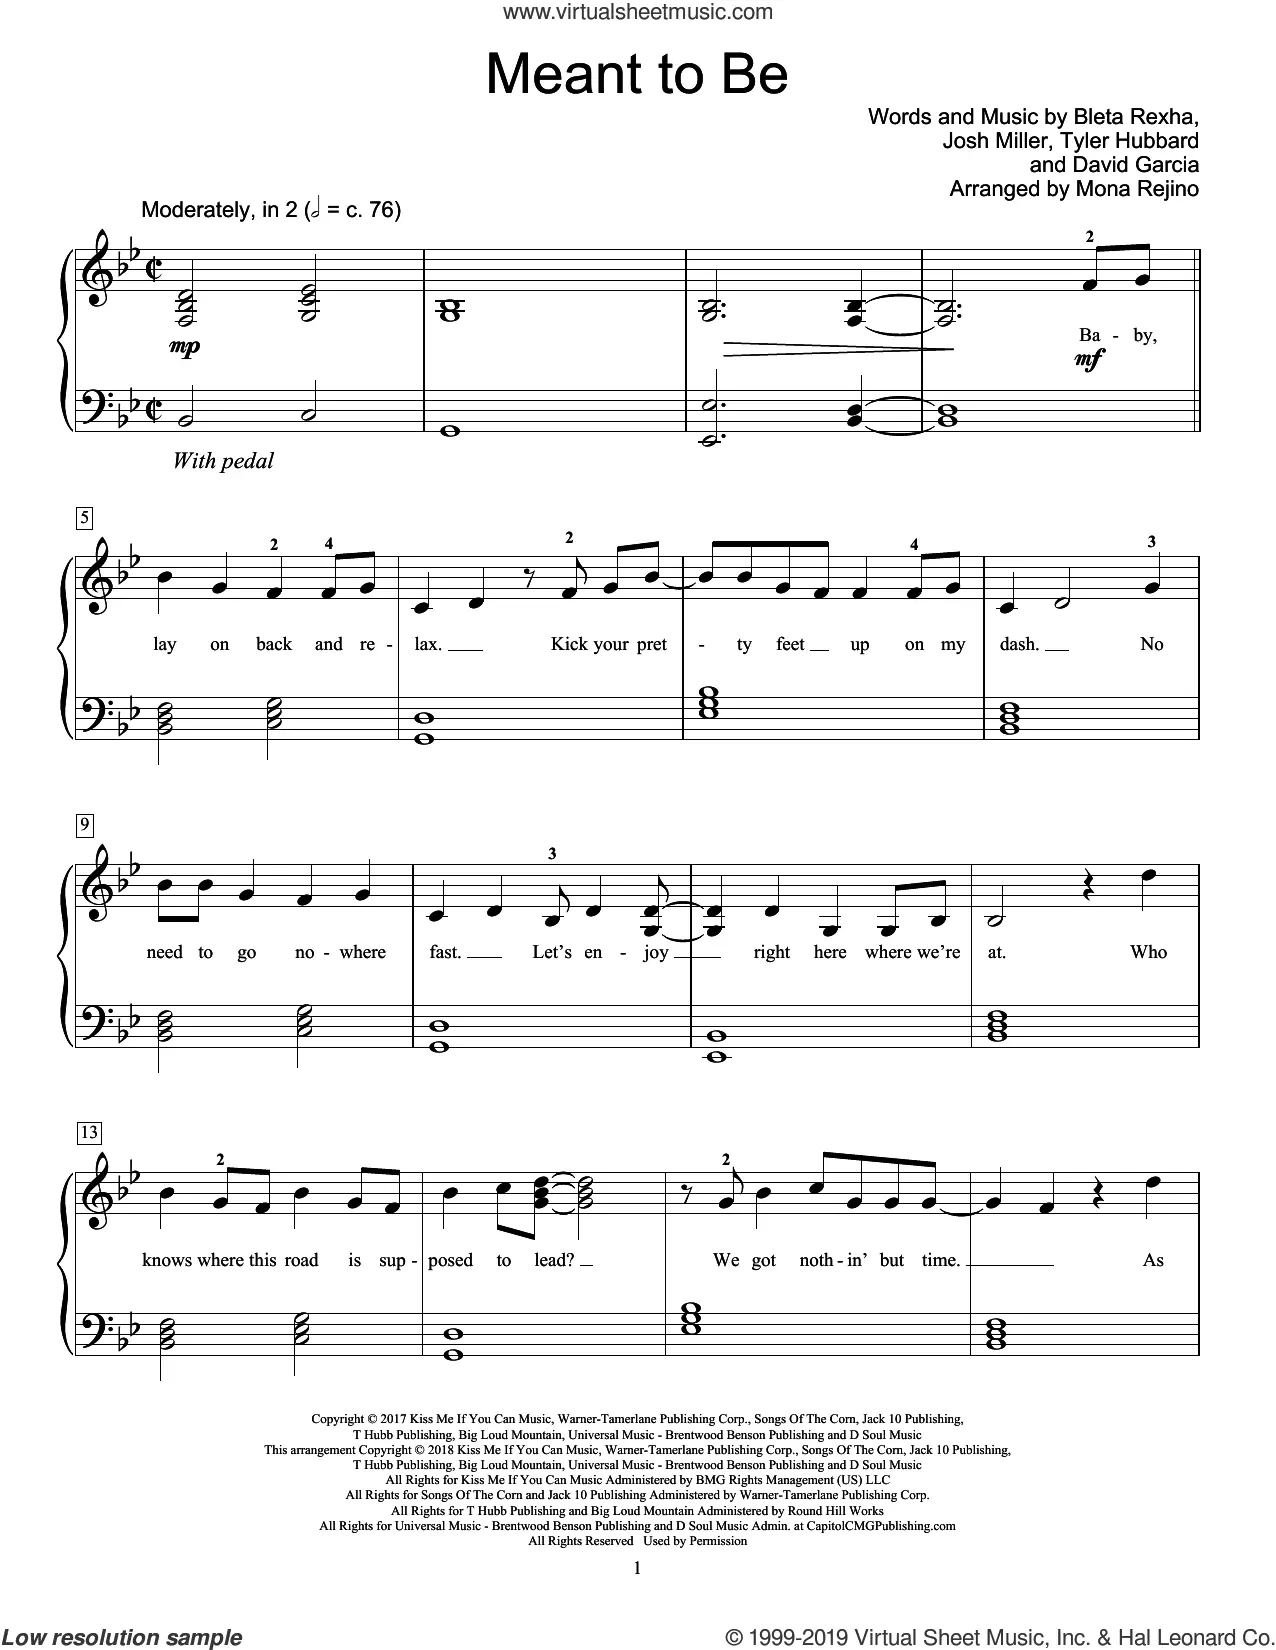 Louis Tomlinson - Back to You ft. Bebe Rexha Sheet music for Piano, Vocals ( Piano-Voice)